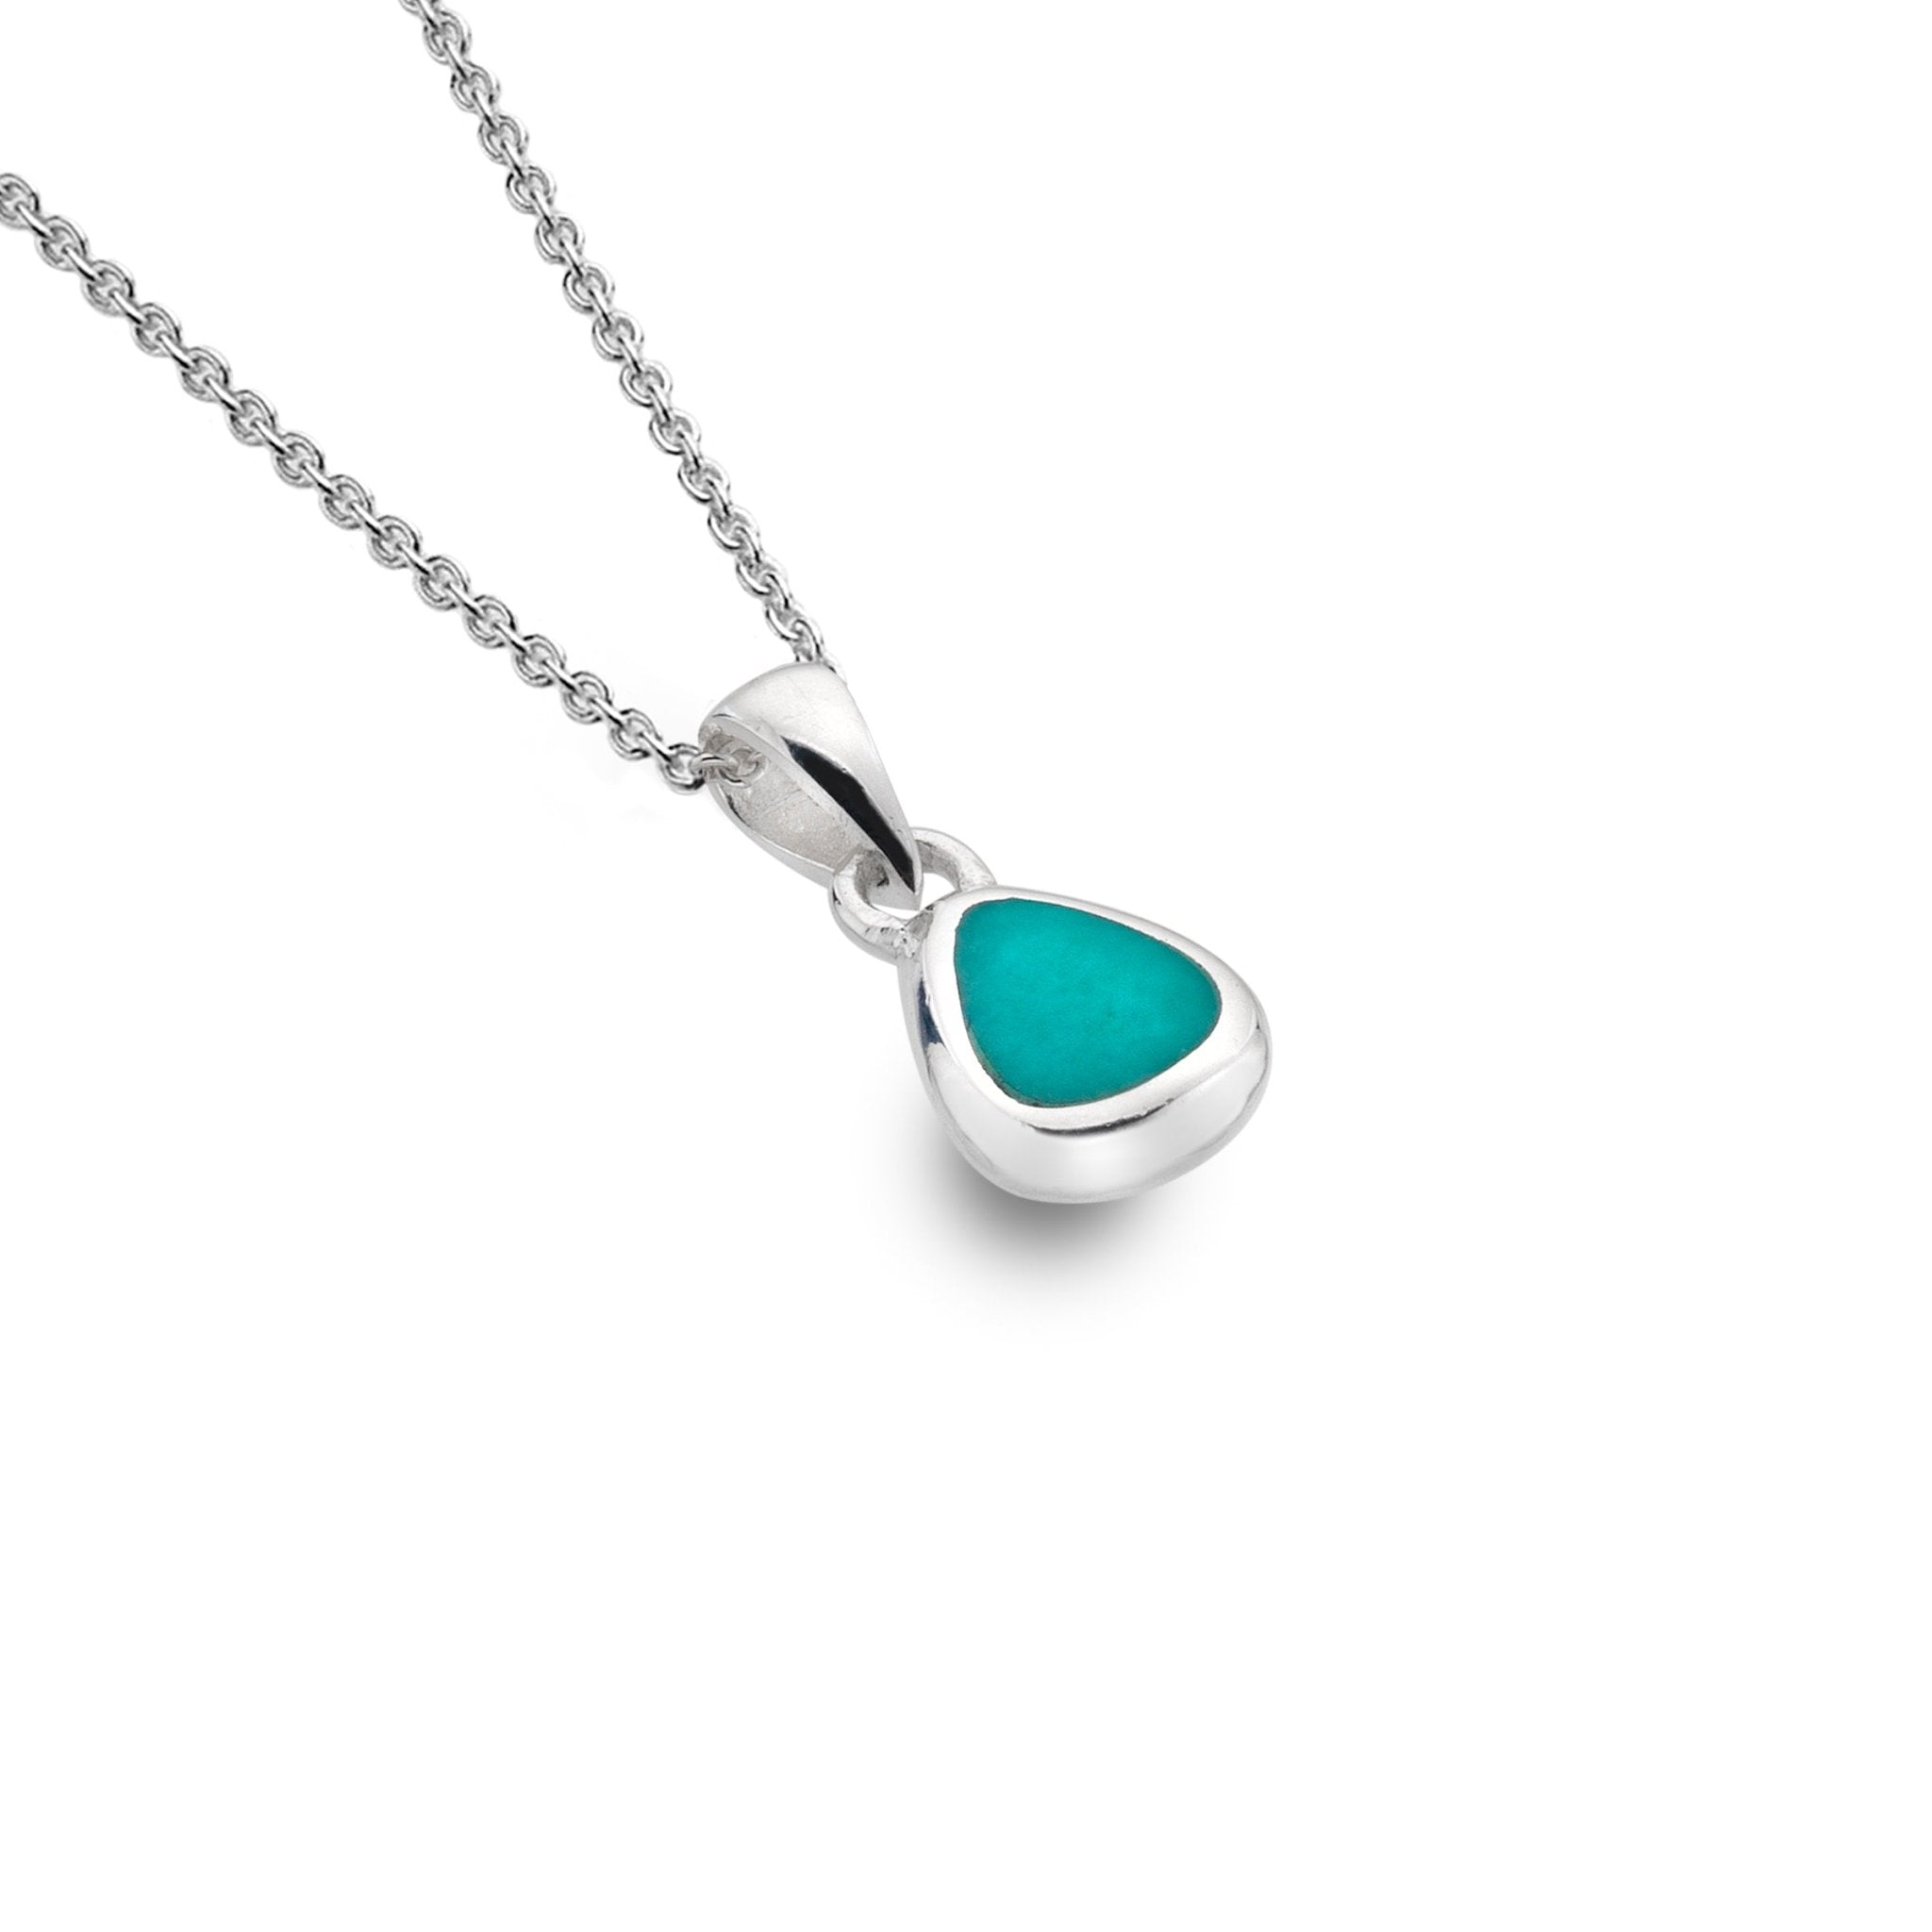 Turquoise Gold Pendant Necklace - Turquoise Jewellery – Carrie Elizabeth